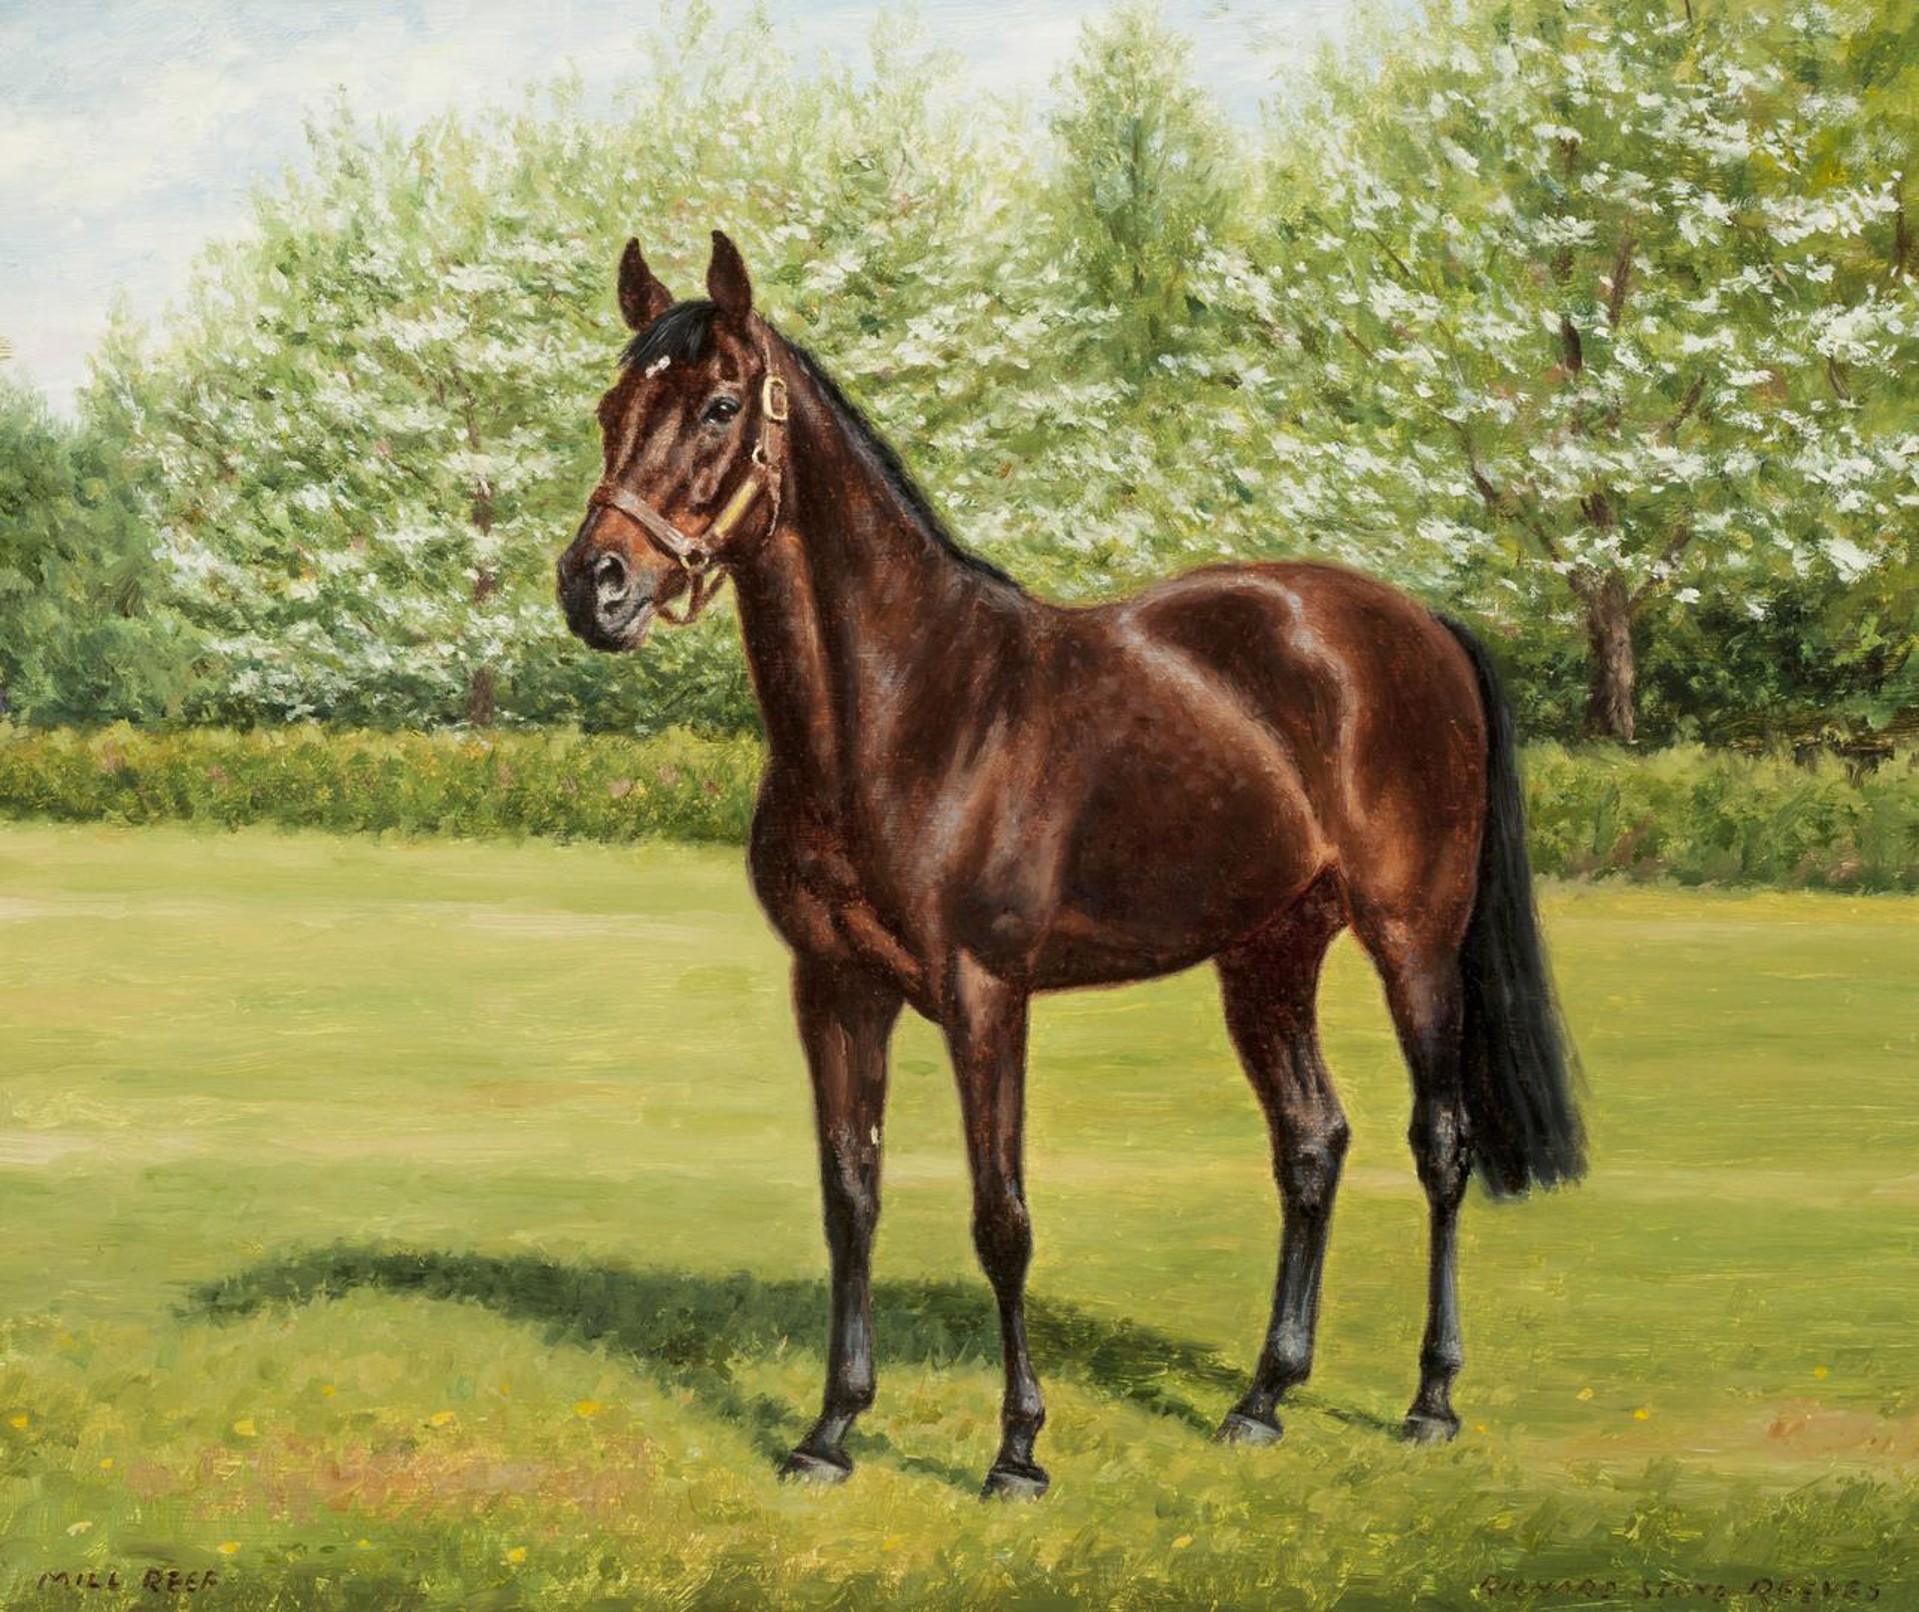 Mill Reef by Richard Stone Reeves